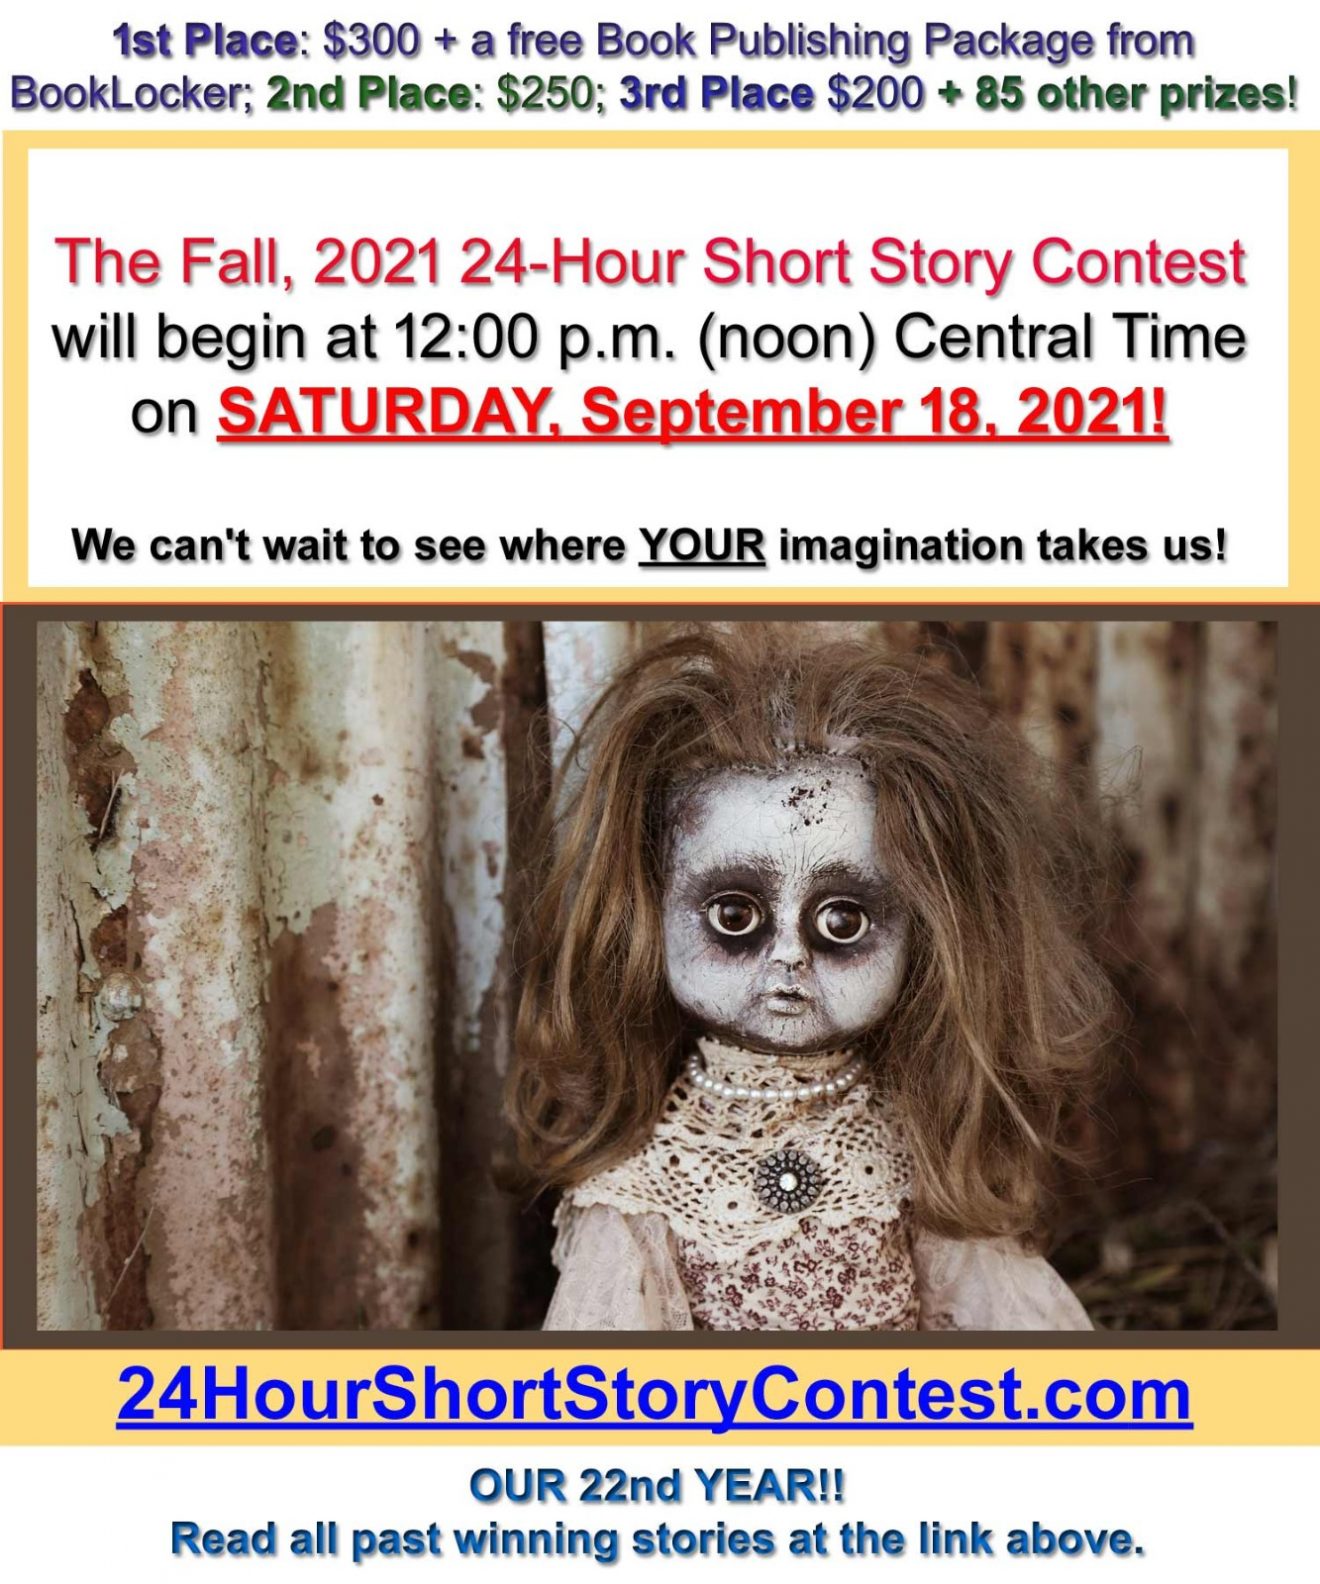 LAST CHANCE! START-TIME IS TOMORROW!! What Will the Fall, 2021 24-Hour Short Story Contest Topic Be?!?!